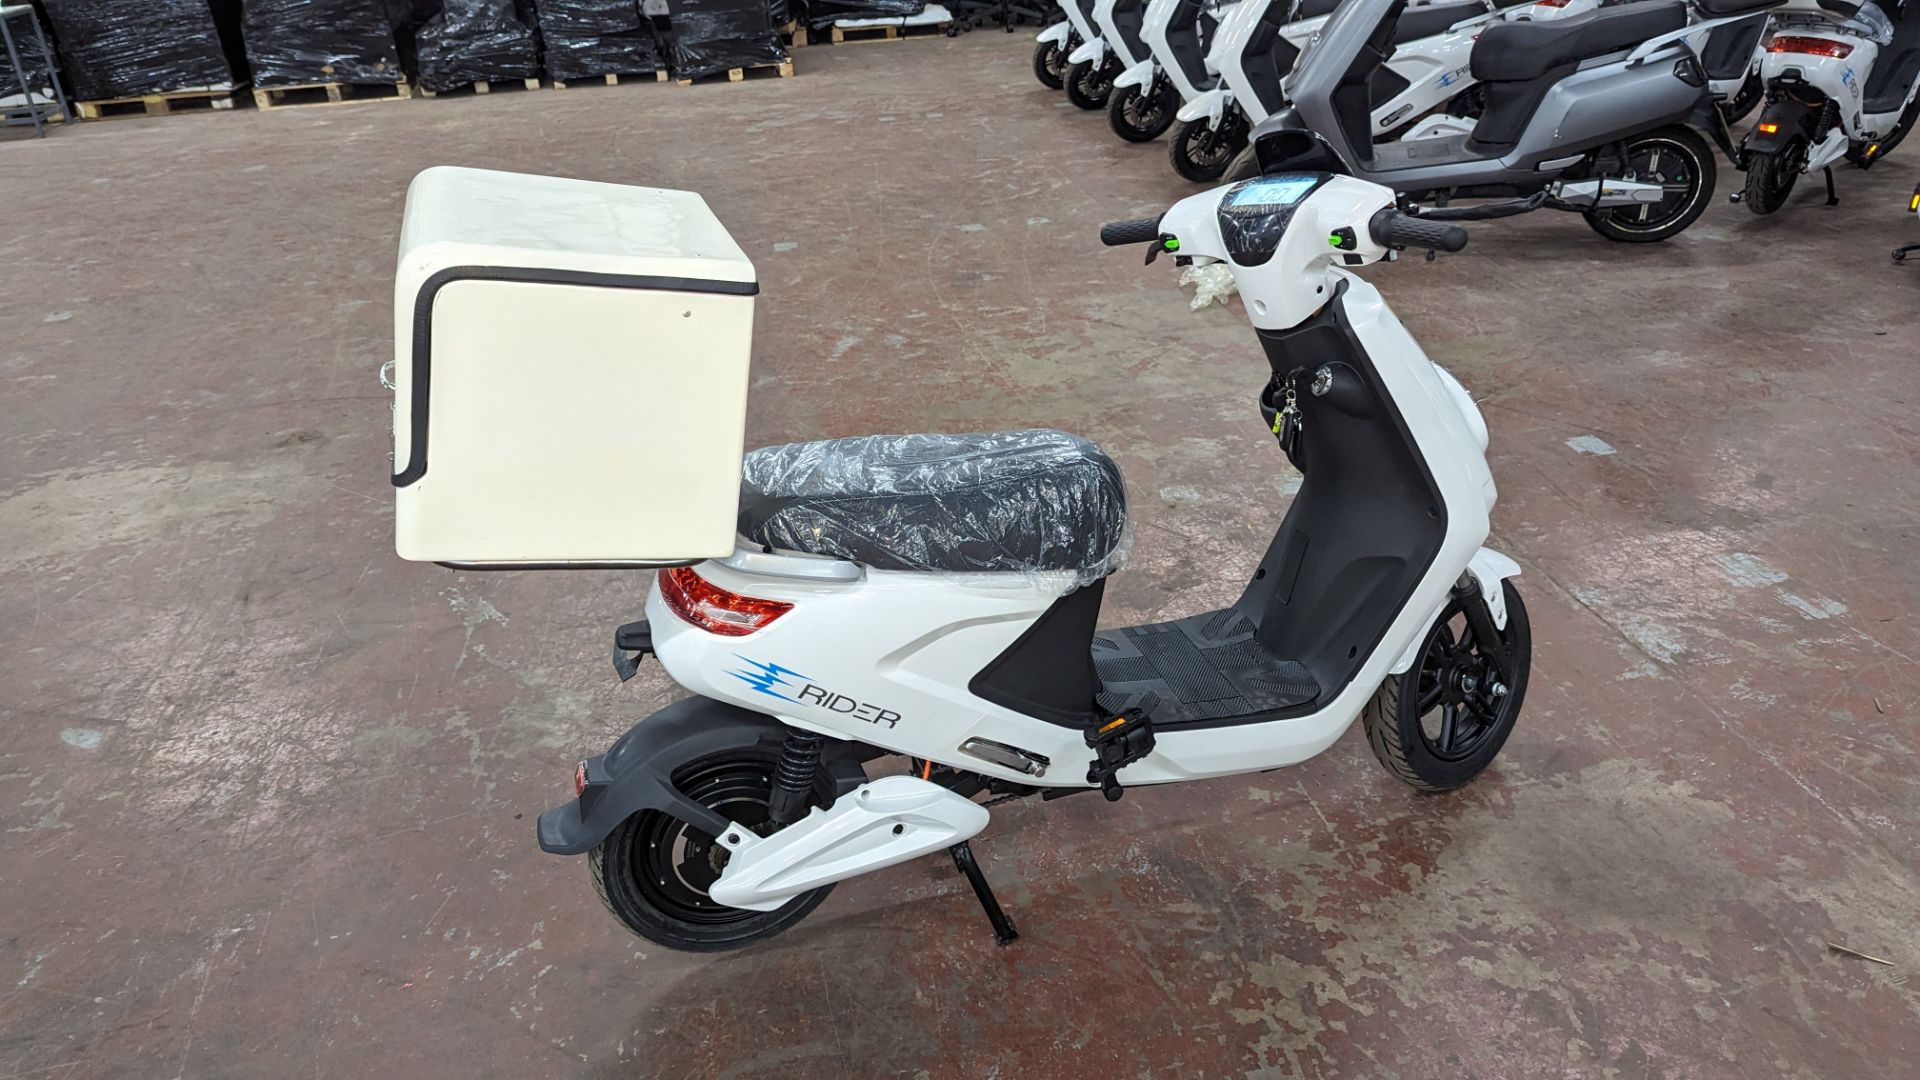 Model 18 Electric Bike: Zero (0) recorded miles, white body with black detailing, insulated box moun - Image 6 of 14